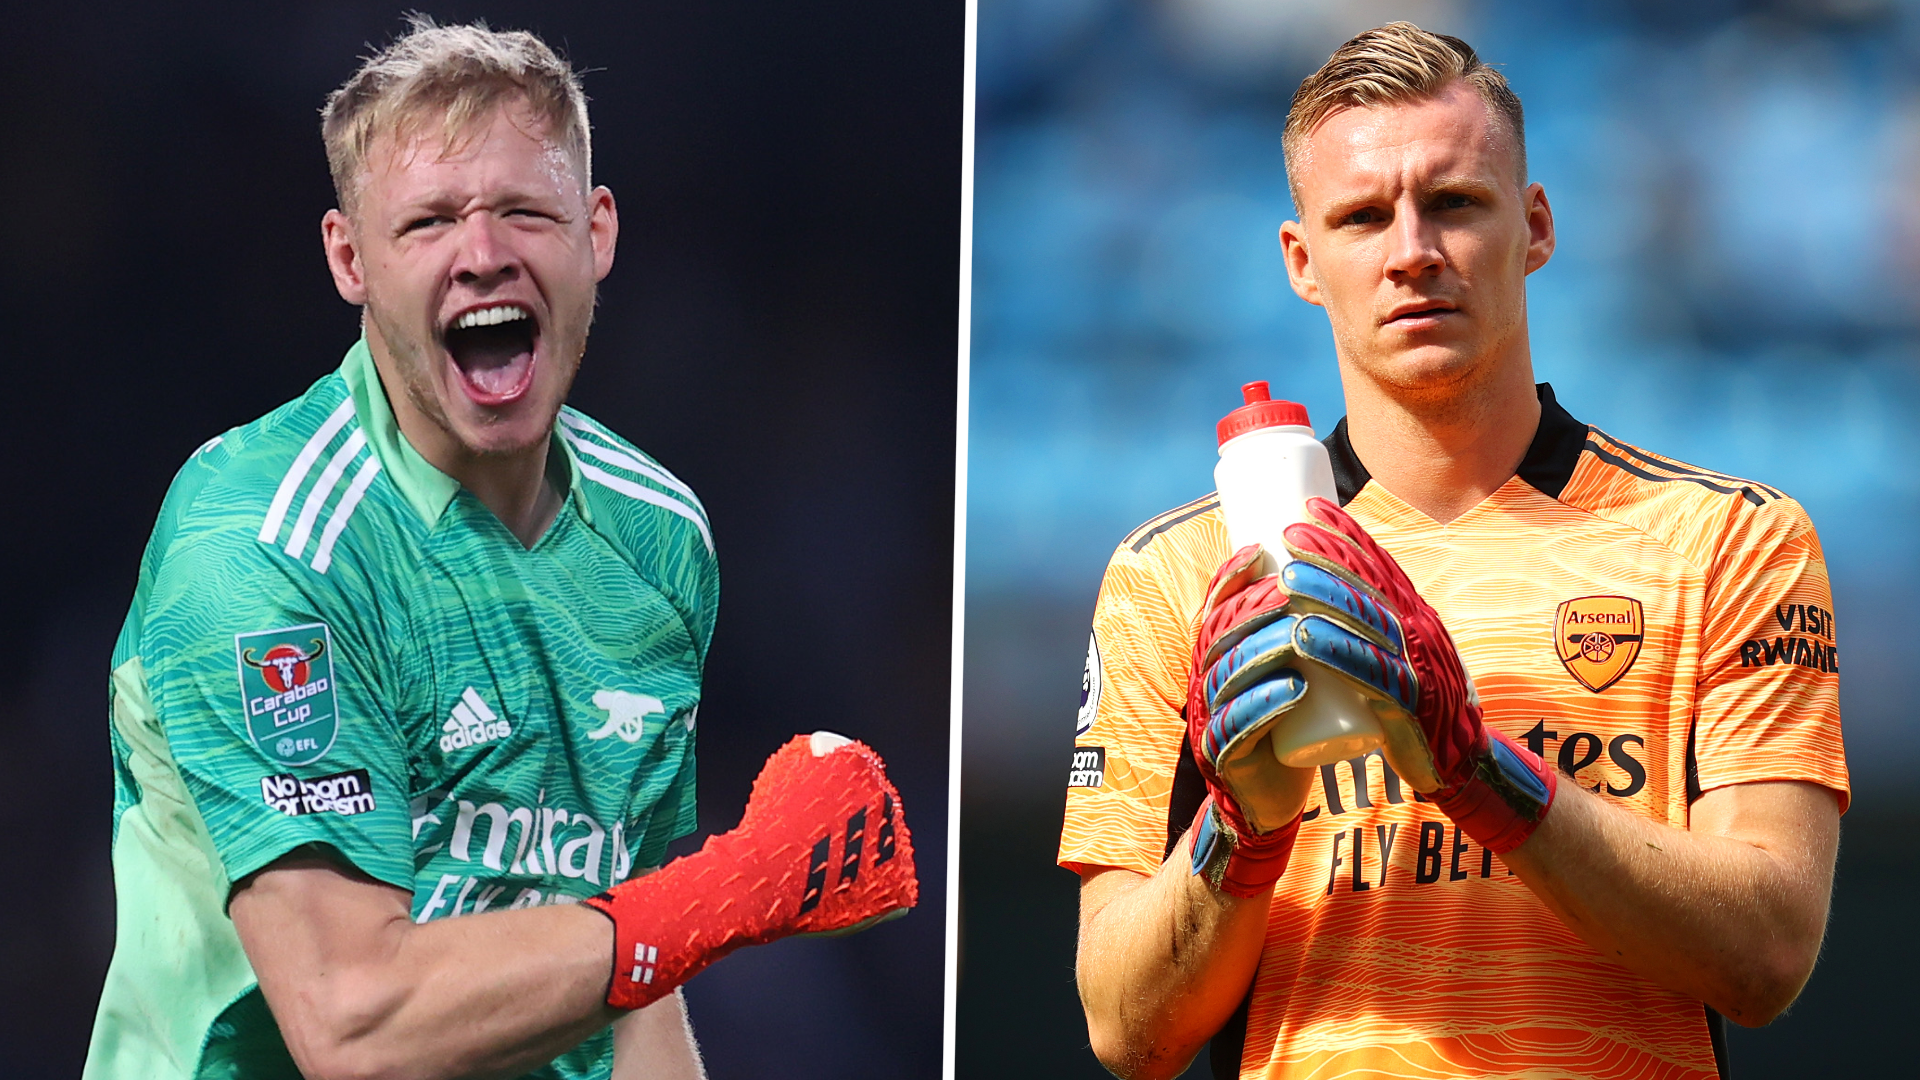 'Arteta has given me no clear reason' - Leno admits he could seek January transfer after losing Arsenal spot to Ramsdale